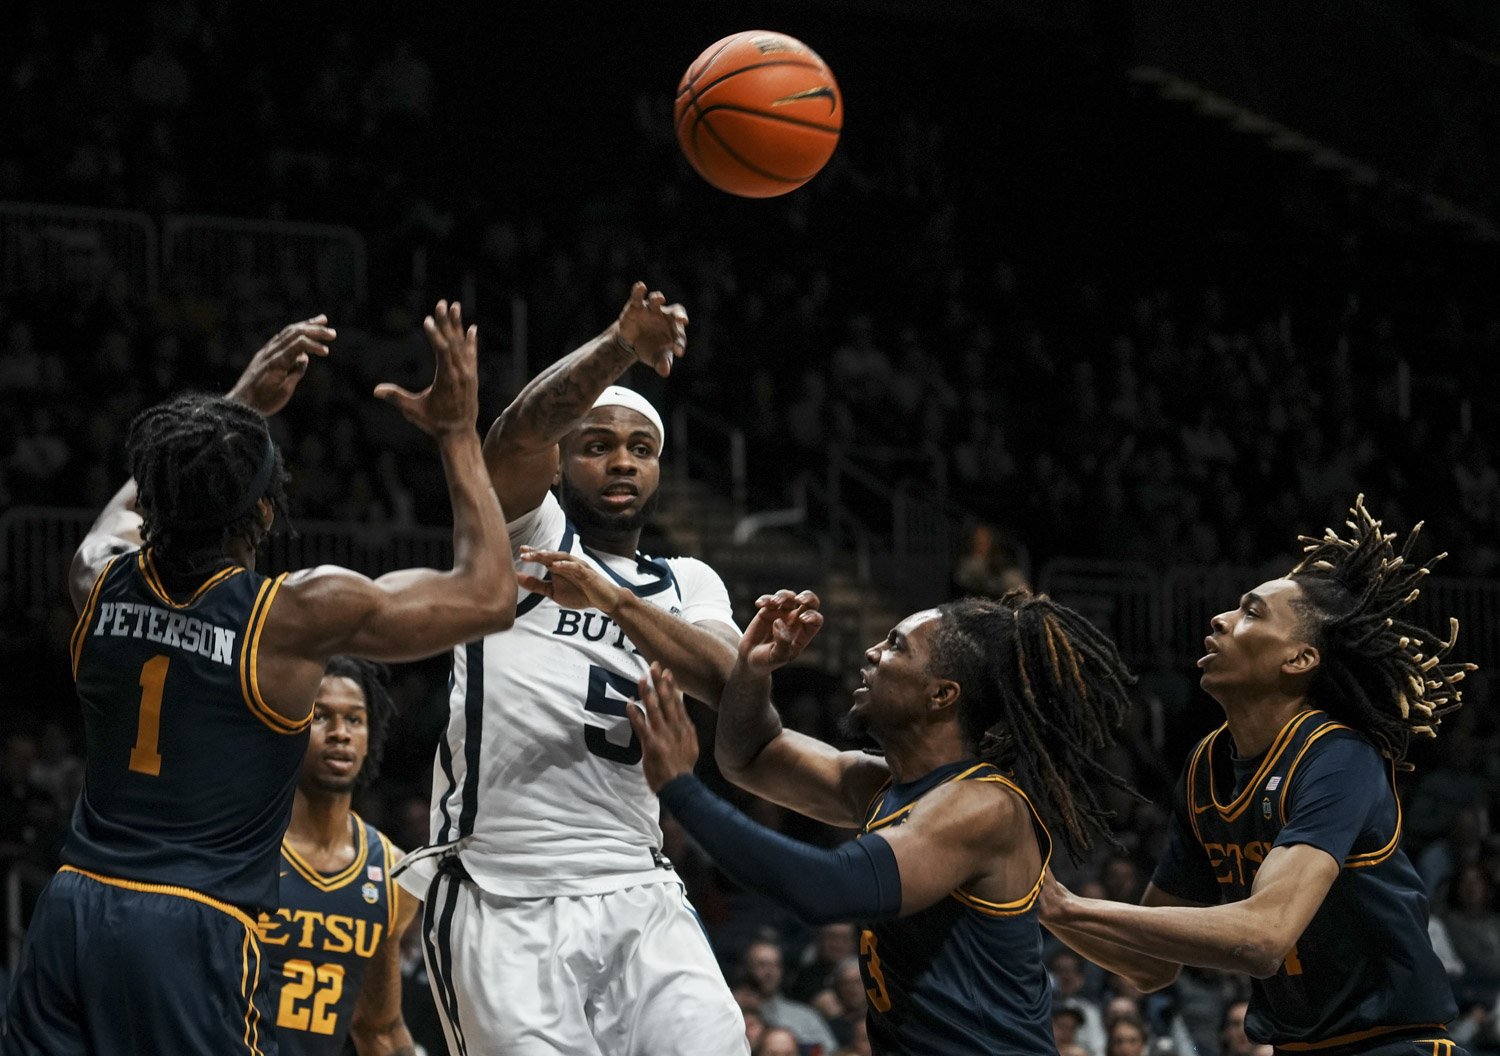  Butler Bulldogs guard Posh Alexander (5) passes the ball during the game between Butler Bulldogs and East Tennessee State Buccaneers Monday, Nov. 13, 2023, at Hinkle Fieldhouse in Indianapolis. Bulldogs beat Buccaneers 81-47. 